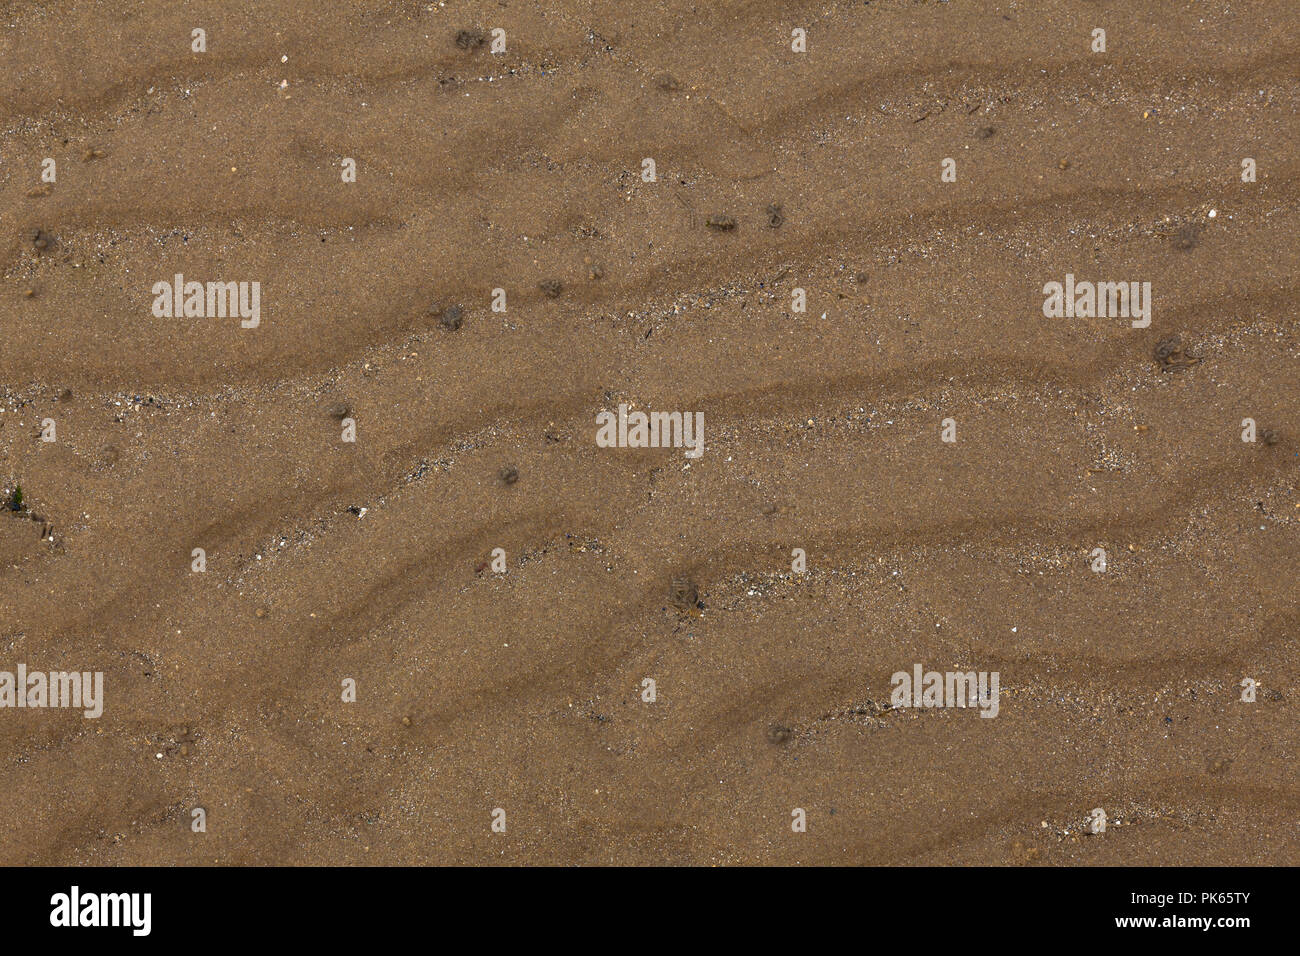 Ripples in sand on a beach at low tide. Stock Photo